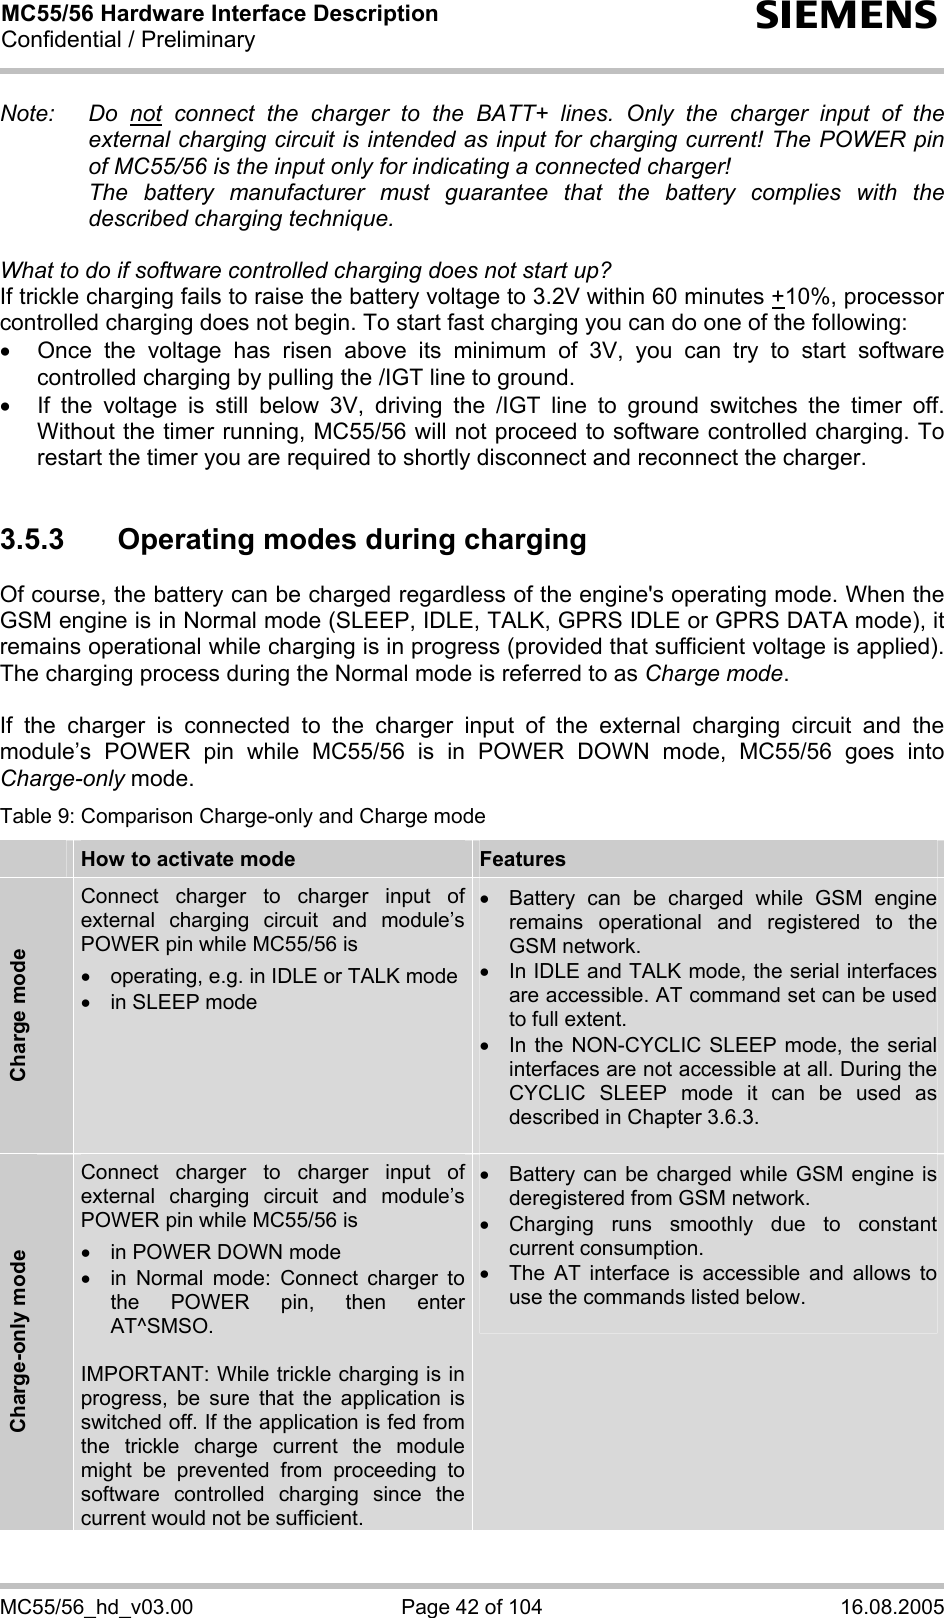 MC55/56 Hardware Interface Description Confidential / Preliminary s MC55/56_hd_v03.00  Page 42 of 104  16.08.2005 Note: Do not connect the charger to the BATT+ lines. Only the charger input of the external charging circuit is intended as input for charging current! The POWER pin of MC55/56 is the input only for indicating a connected charger!   The battery manufacturer must guarantee that the battery complies with the described charging technique.   What to do if software controlled charging does not start up? If trickle charging fails to raise the battery voltage to 3.2V within 60 minutes +10%, processor controlled charging does not begin. To start fast charging you can do one of the following:  •  Once the voltage has risen above its minimum of 3V, you can try to start software controlled charging by pulling the /IGT line to ground.  •  If the voltage is still below 3V, driving the /IGT line to ground switches the timer off. Without the timer running, MC55/56 will not proceed to software controlled charging. To restart the timer you are required to shortly disconnect and reconnect the charger.  3.5.3  Operating modes during charging Of course, the battery can be charged regardless of the engine&apos;s operating mode. When the GSM engine is in Normal mode (SLEEP, IDLE, TALK, GPRS IDLE or GPRS DATA mode), it remains operational while charging is in progress (provided that sufficient voltage is applied). The charging process during the Normal mode is referred to as Charge mode.   If the charger is connected to the charger input of the external charging circuit and the module’s POWER pin while MC55/56 is in POWER DOWN mode, MC55/56 goes into Charge-only mode.  Table 9: Comparison Charge-only and Charge mode  How to activate mode  Features Charge mode Connect charger to charger input of external charging circuit and module’s POWER pin while MC55/56 is •  operating, e.g. in IDLE or TALK mode •  in SLEEP mode •  Battery can be charged while GSM engine remains operational and registered to the GSM network. •  In IDLE and TALK mode, the serial interfaces are accessible. AT command set can be used to full extent. •  In the NON-CYCLIC SLEEP mode, the serial interfaces are not accessible at all. During the CYCLIC SLEEP mode it can be used as described in Chapter 3.6.3.  Charge-only mode Connect charger to charger input of external charging circuit and module’s POWER pin while MC55/56 is •  in POWER DOWN mode •  in Normal mode: Connect charger to the POWER pin, then enter AT^SMSO.  IMPORTANT: While trickle charging is in progress, be sure that the application is switched off. If the application is fed from the trickle charge current the module might be prevented from proceeding to software controlled charging since the current would not be sufficient.  •  Battery can be charged while GSM engine is deregistered from GSM network. • Charging runs smoothly due to constant current consumption. •  The AT interface is accessible and allows to use the commands listed below.    